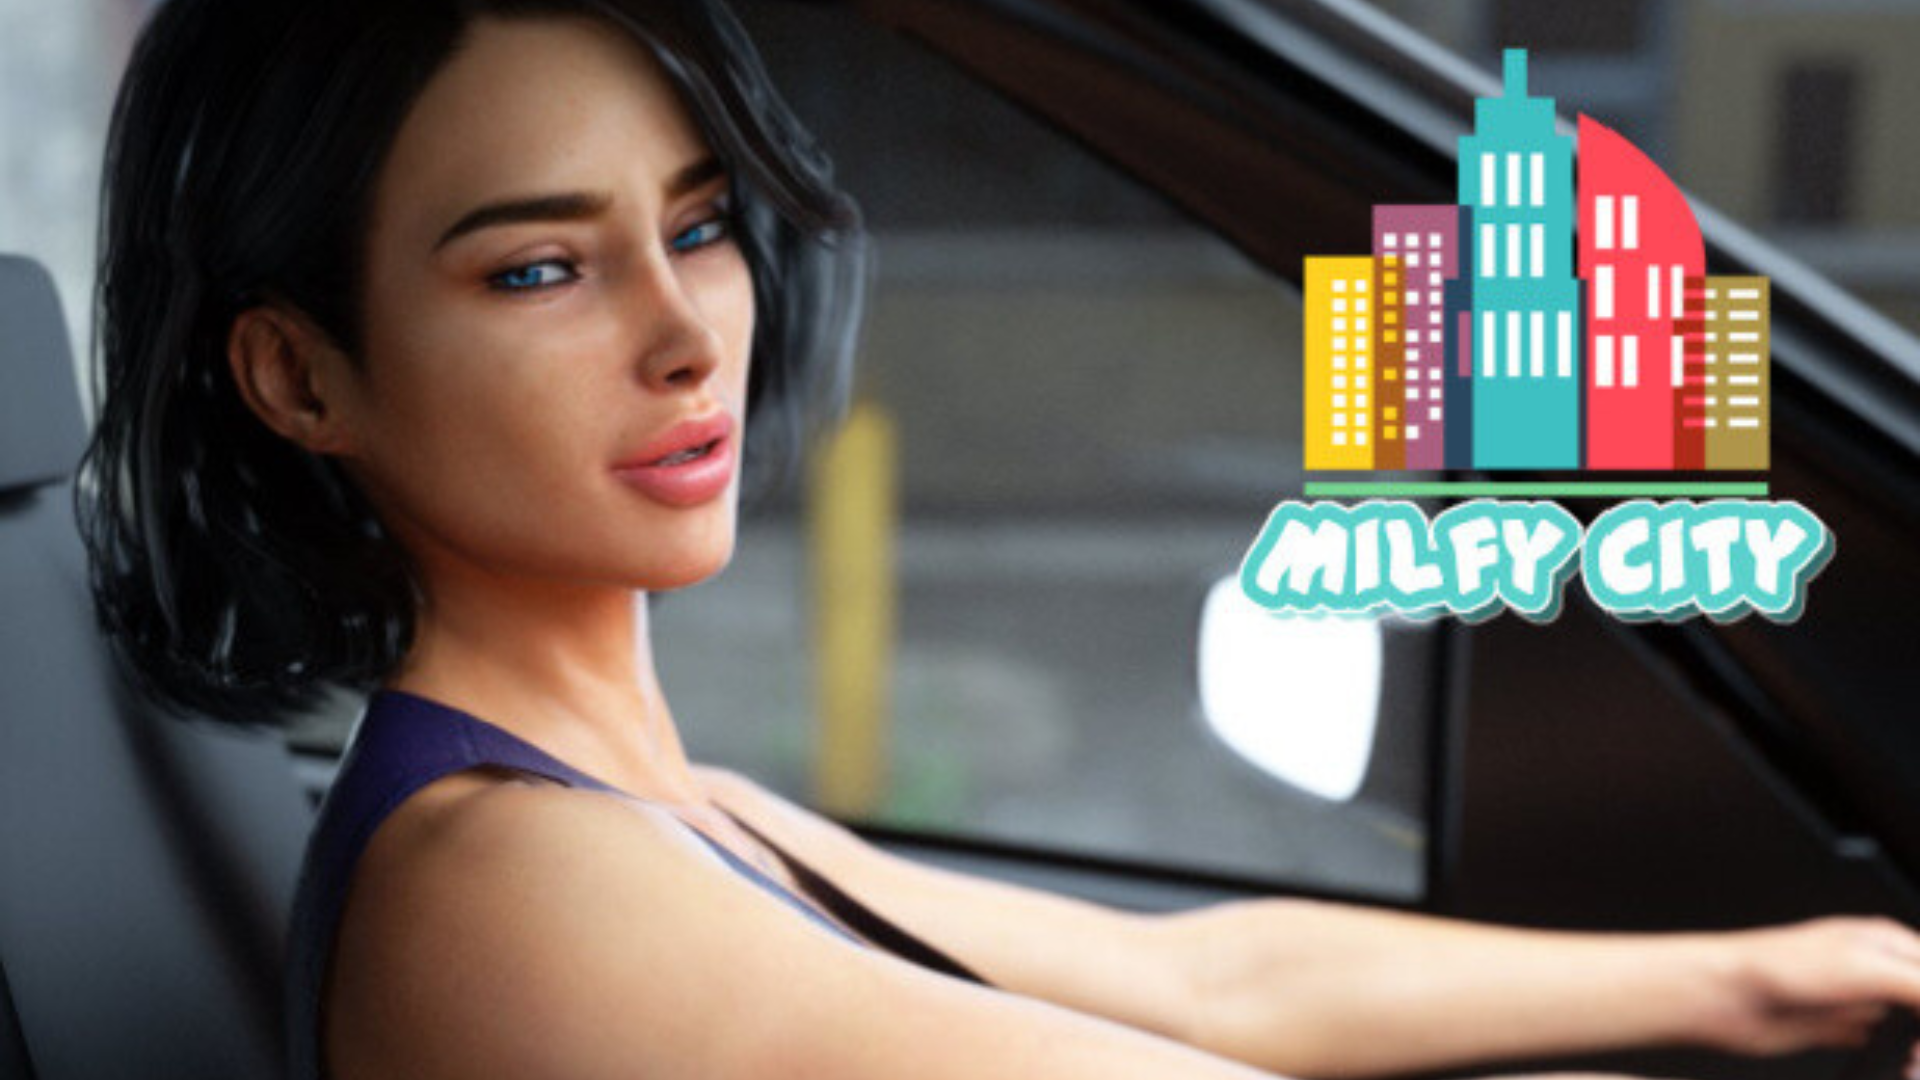 bamboo house recommends milfy city full version pic